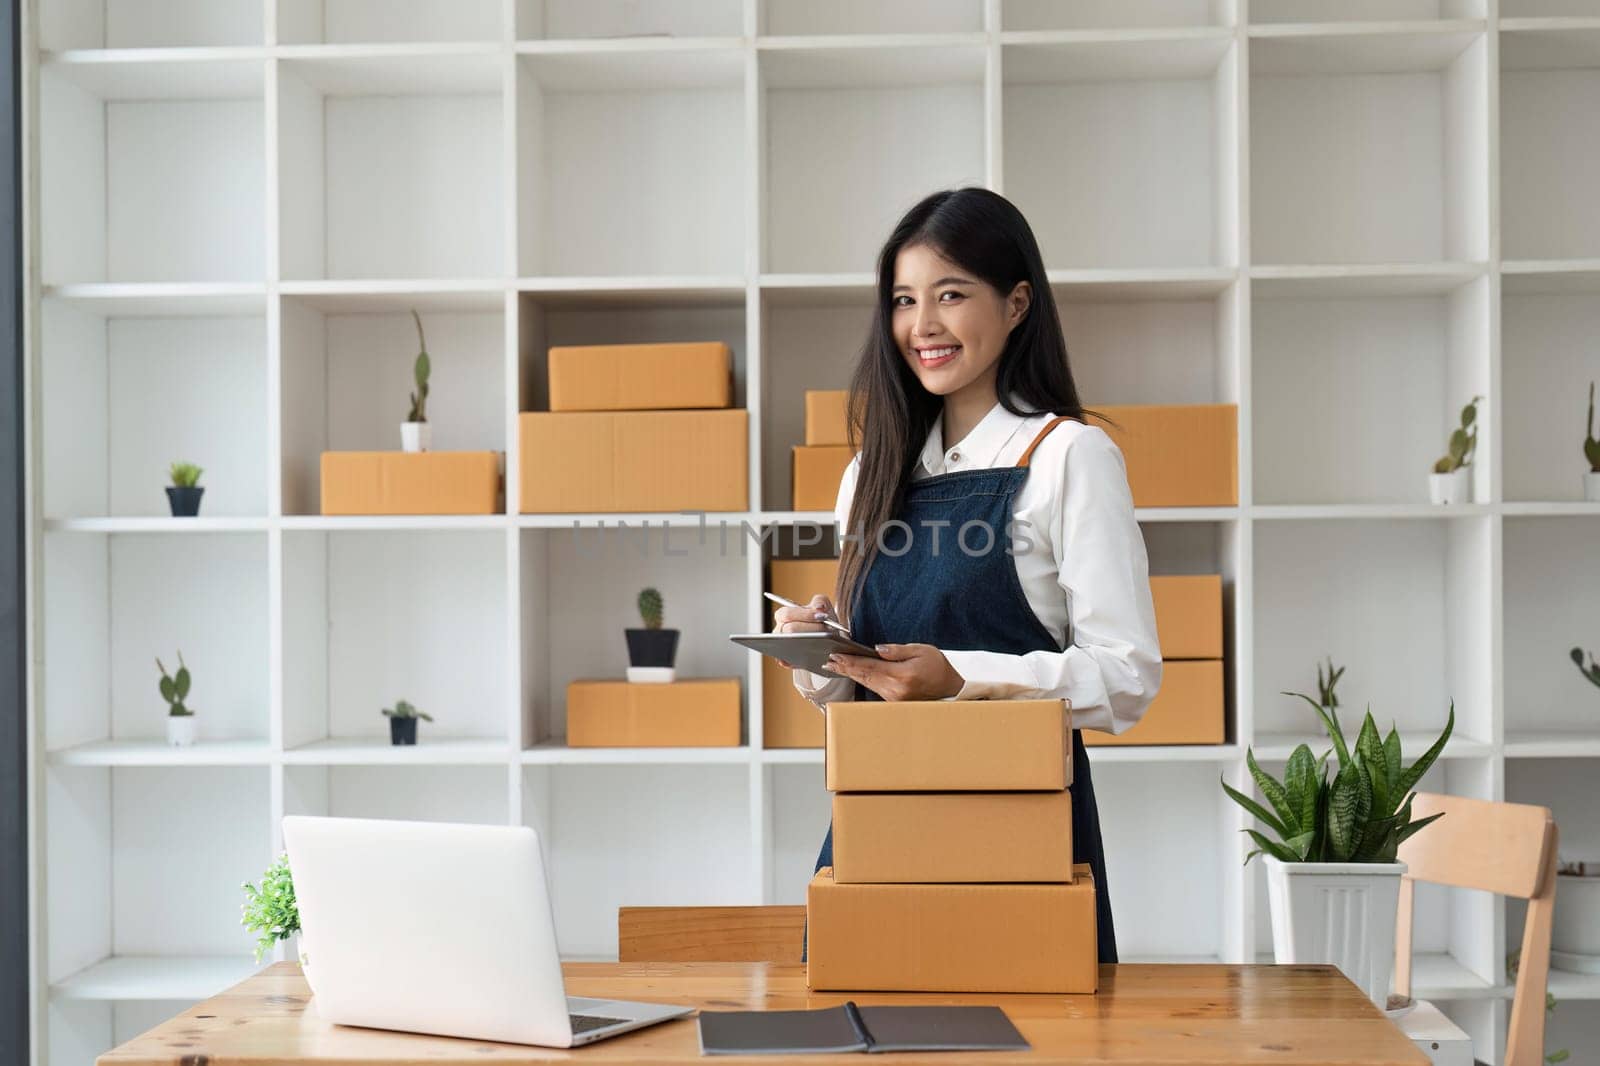 Startup SME small business entrepreneur of freelance Asian woman using tablet and box to receive and review orders online to prepare to pack sell to customers, online sme business ideas by nateemee